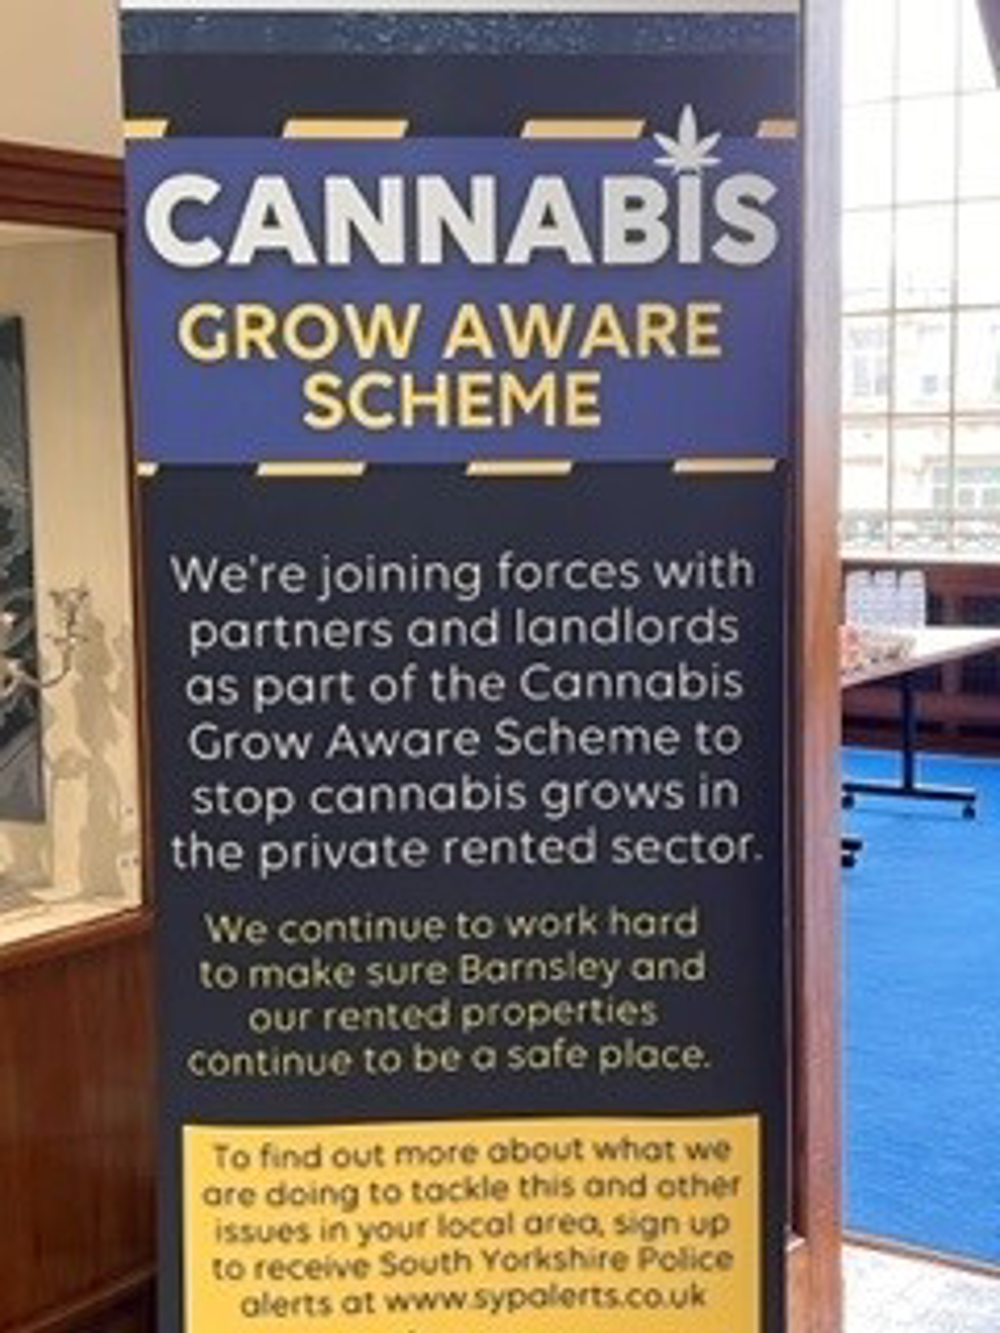 Cannabis aware stand up banner at an event